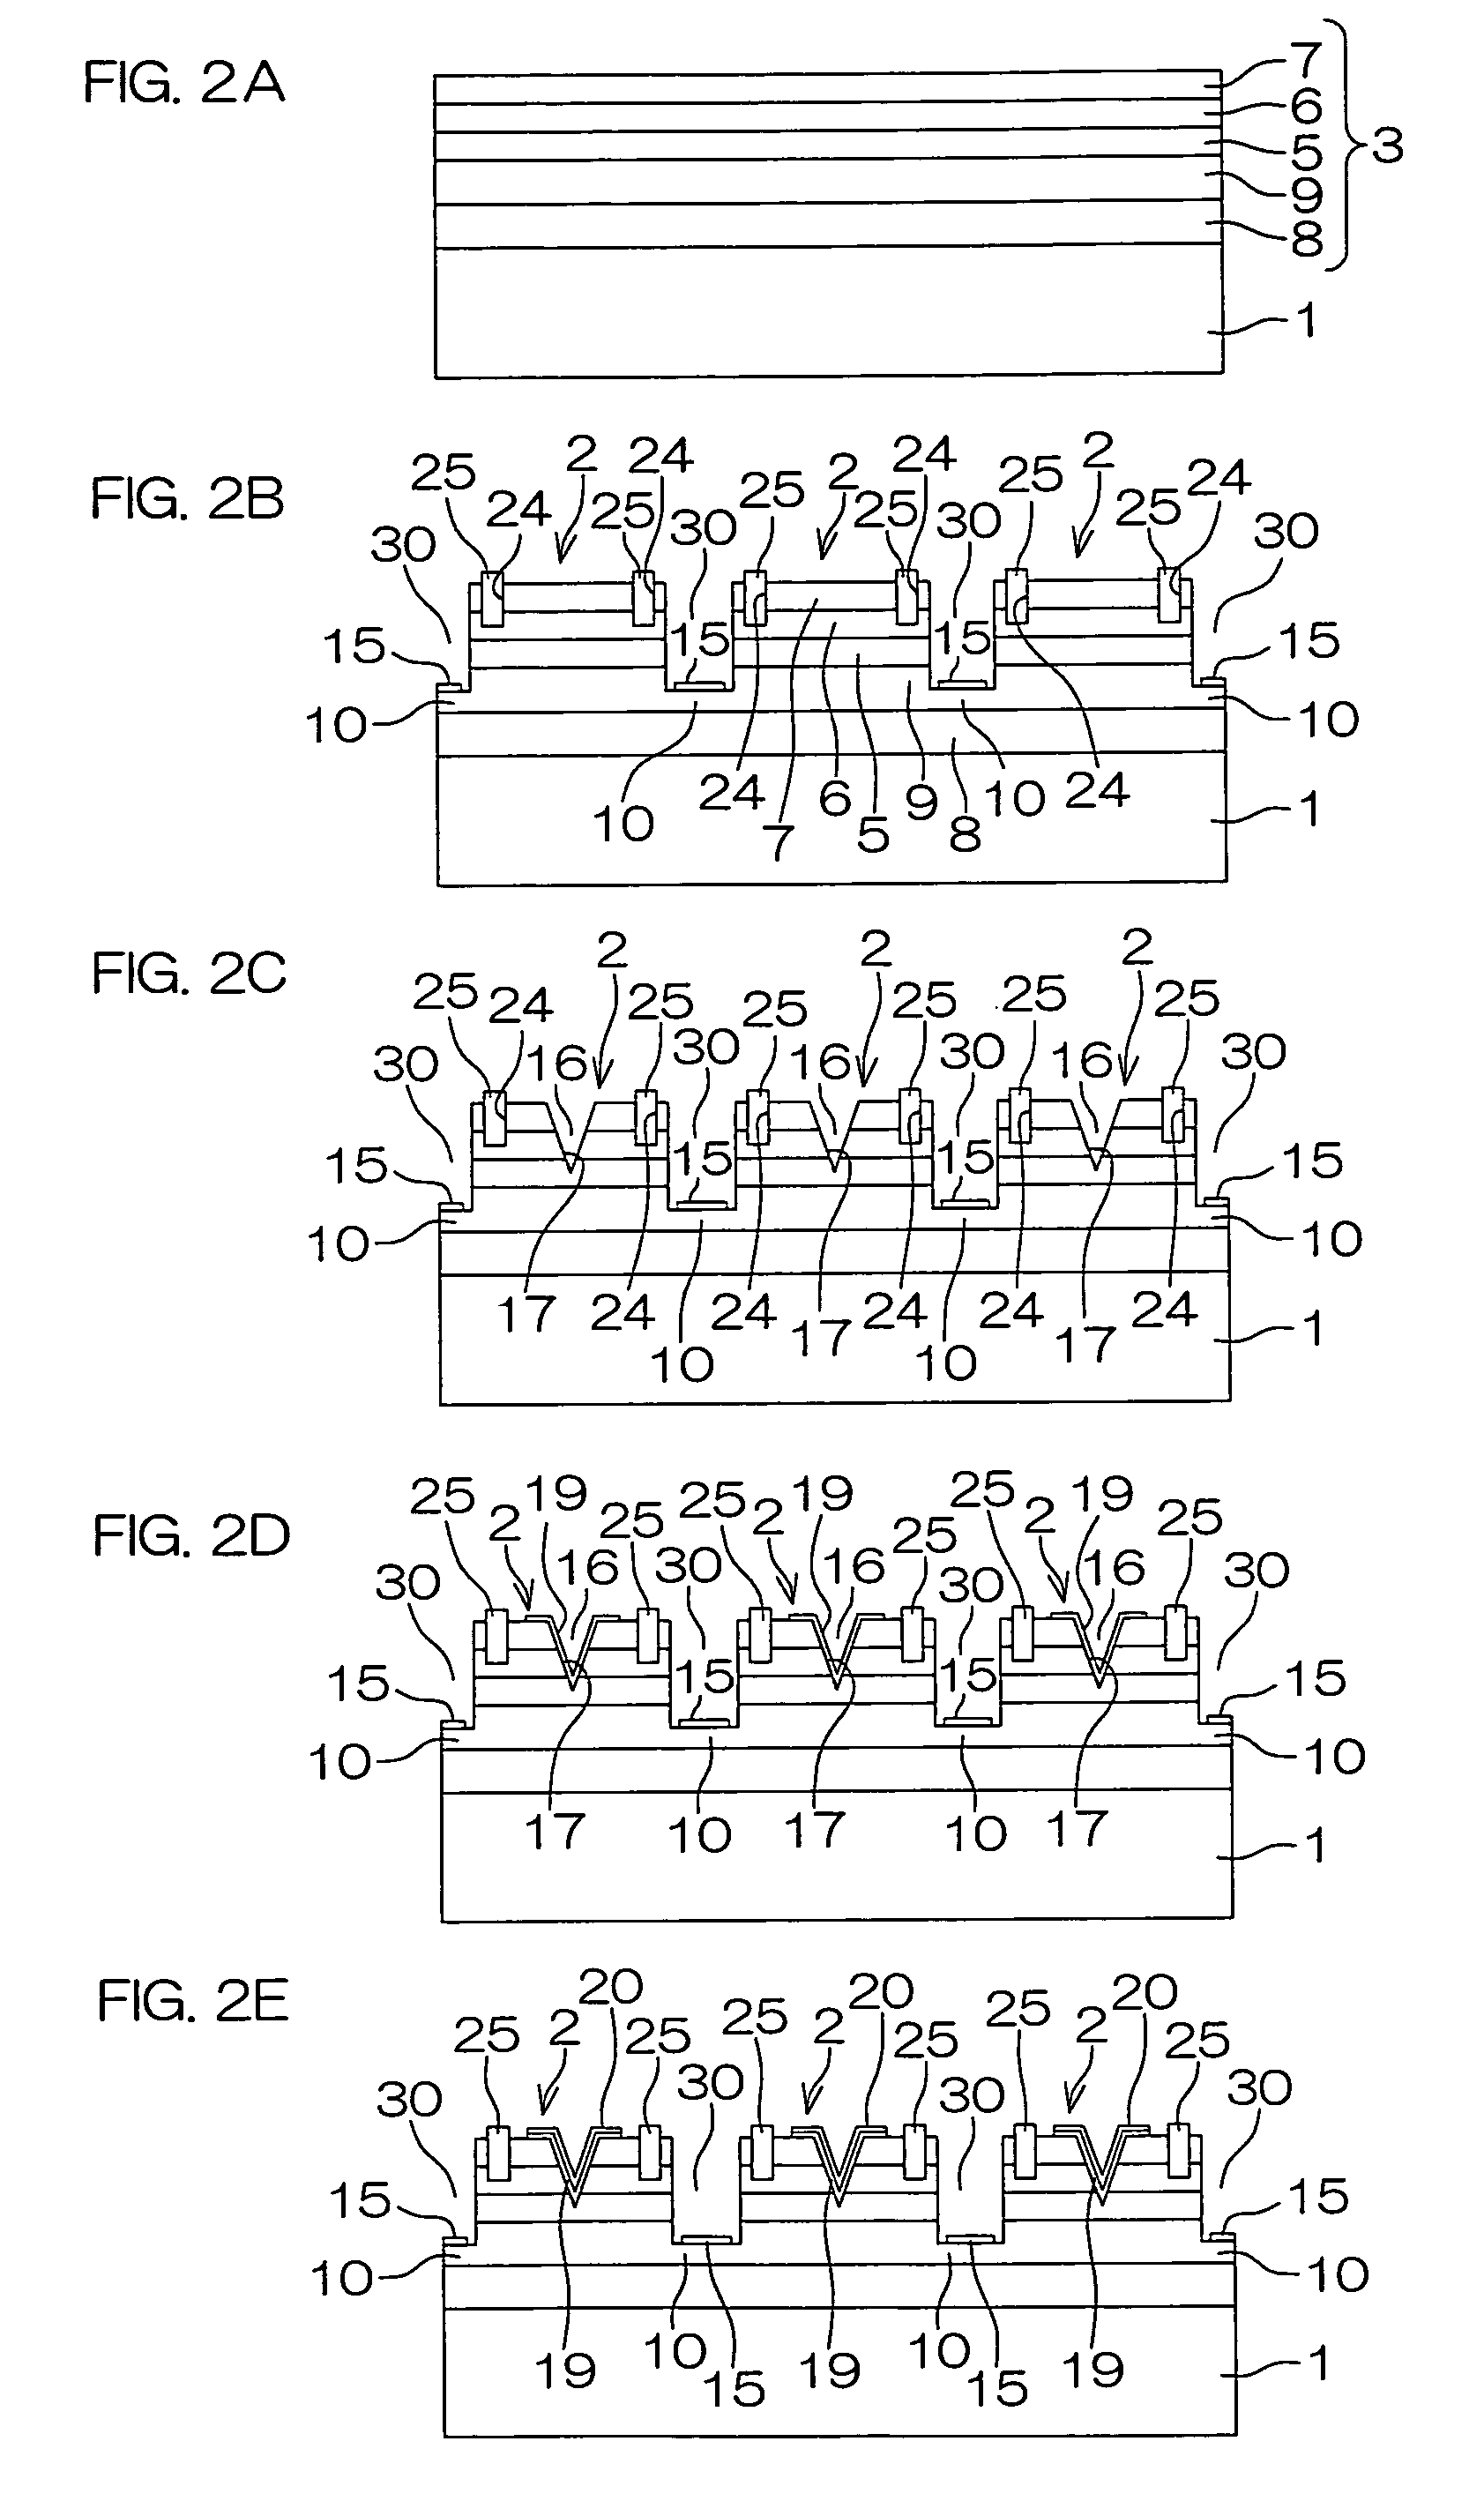 Semiconductor device employing group III-V nitride semiconductors and method for manufacturing the same